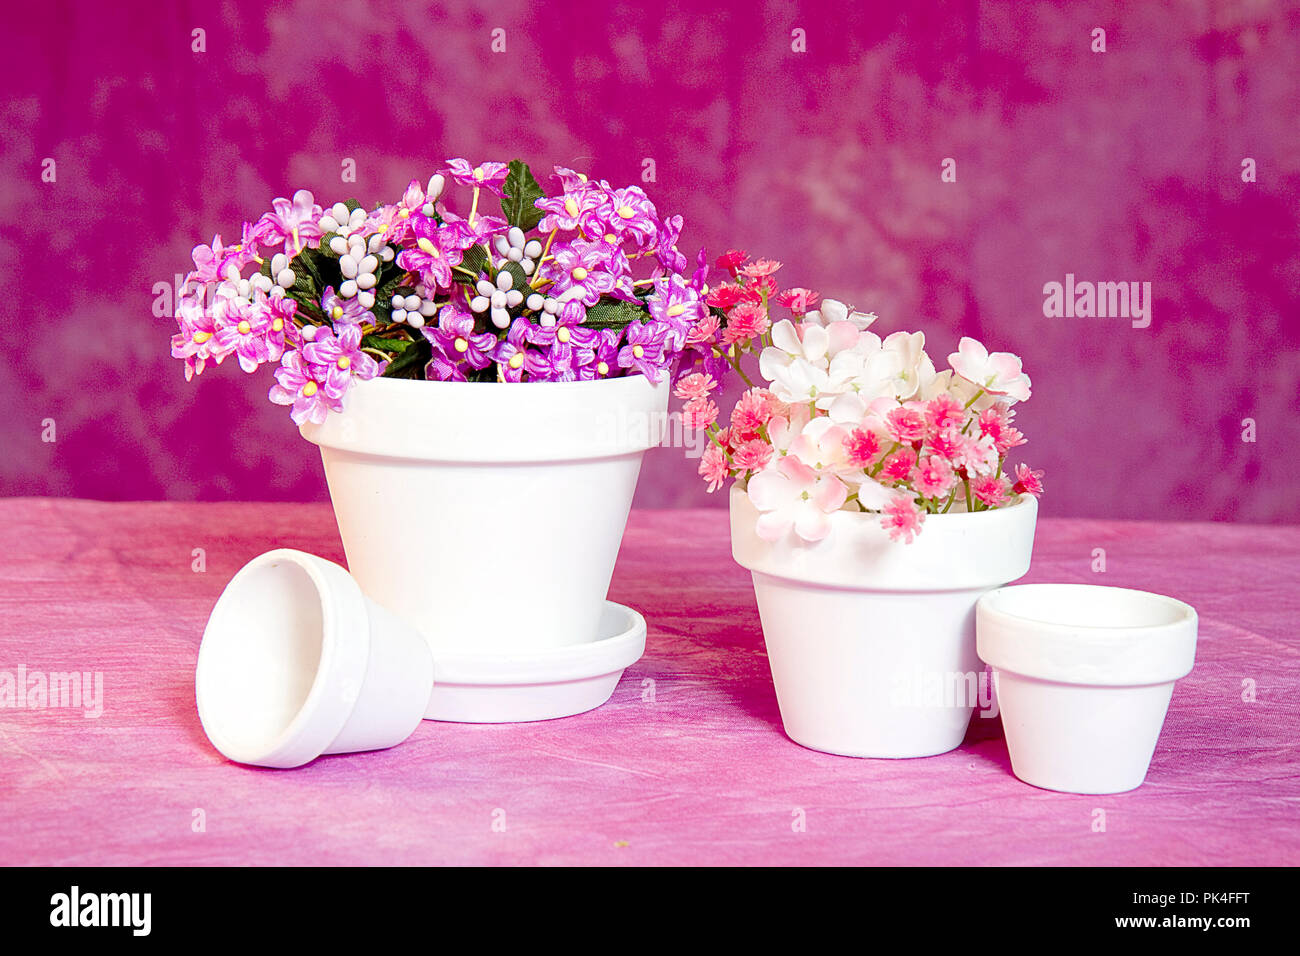 Miniature flower pots filled with tiny pink/lavender flowers isolated on pink texture background. Stock Photo